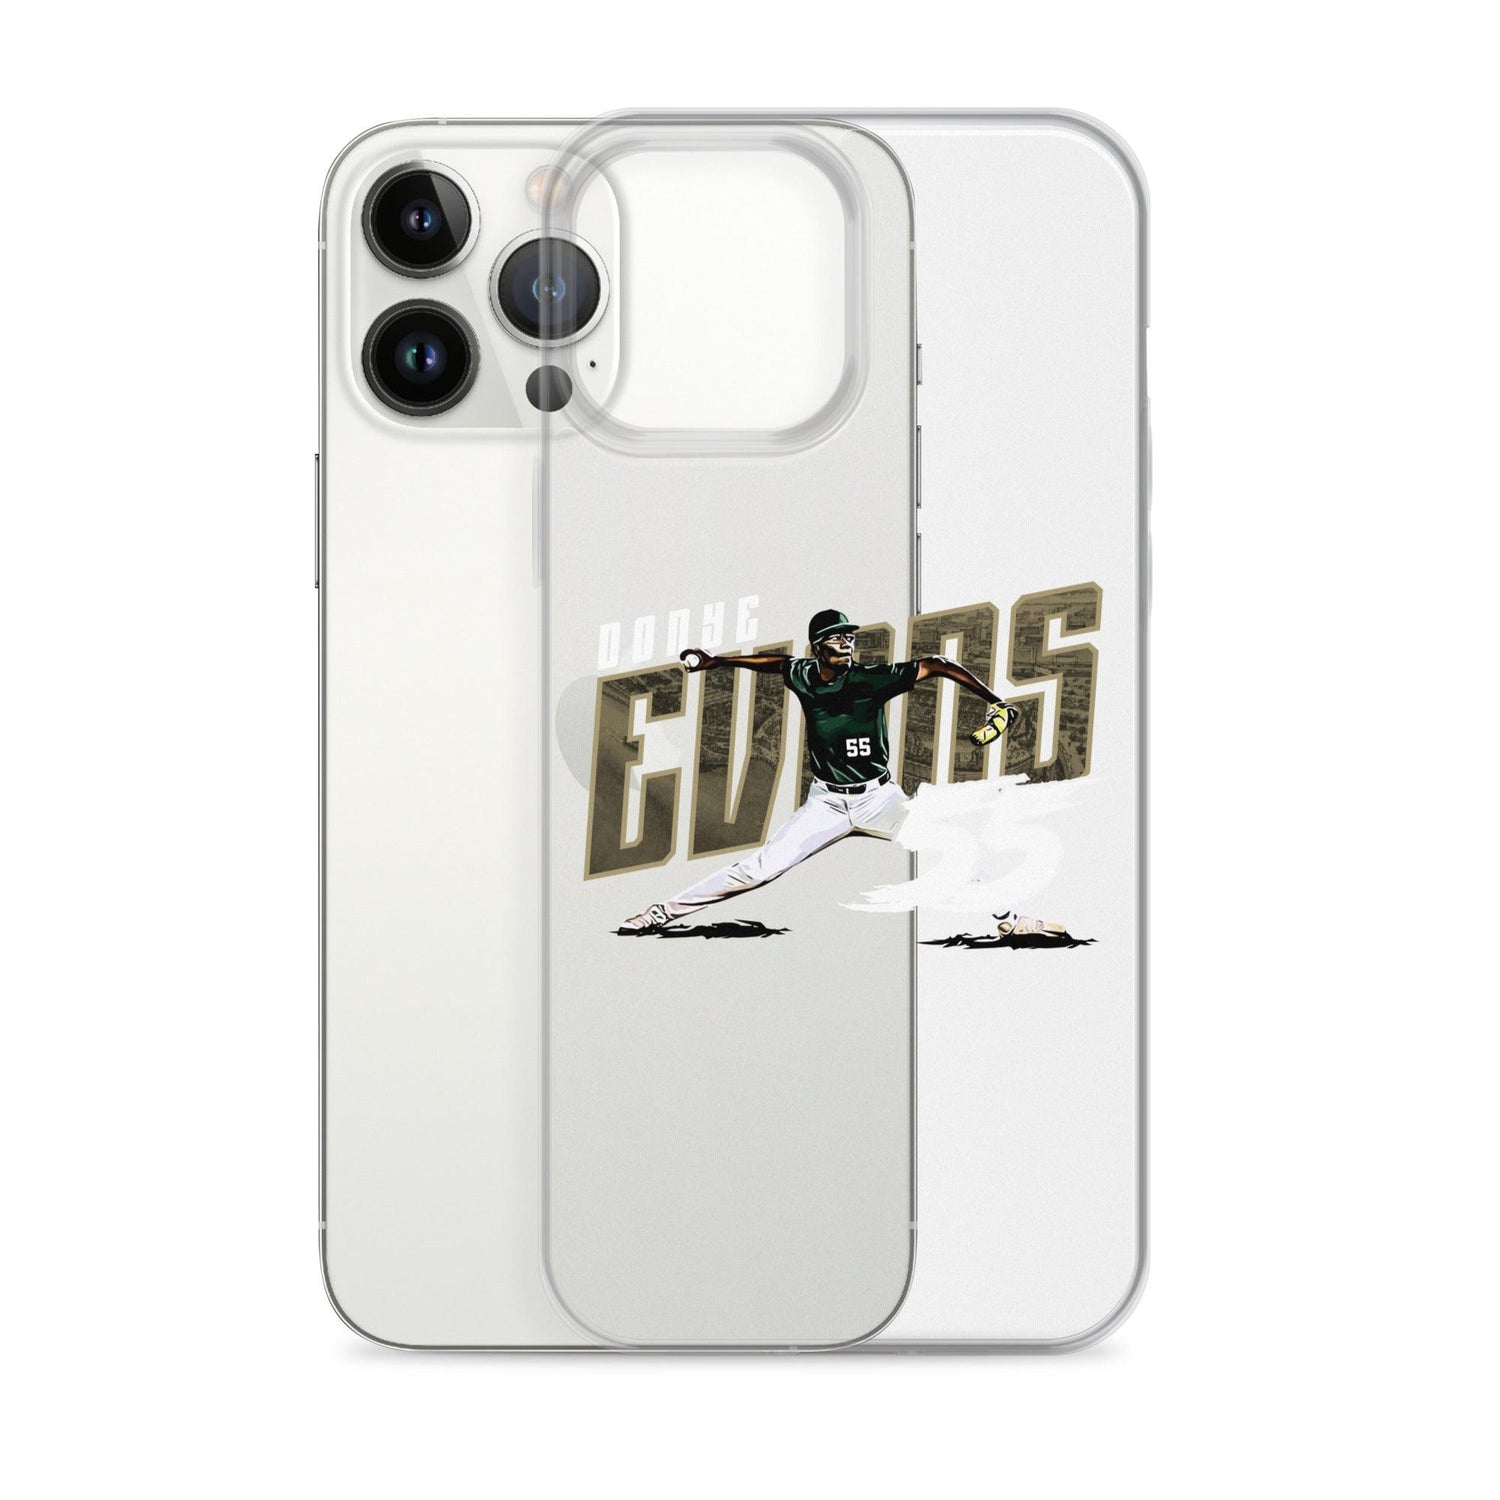 Donye Evans "Gametime" iPhone Case - Fan Arch